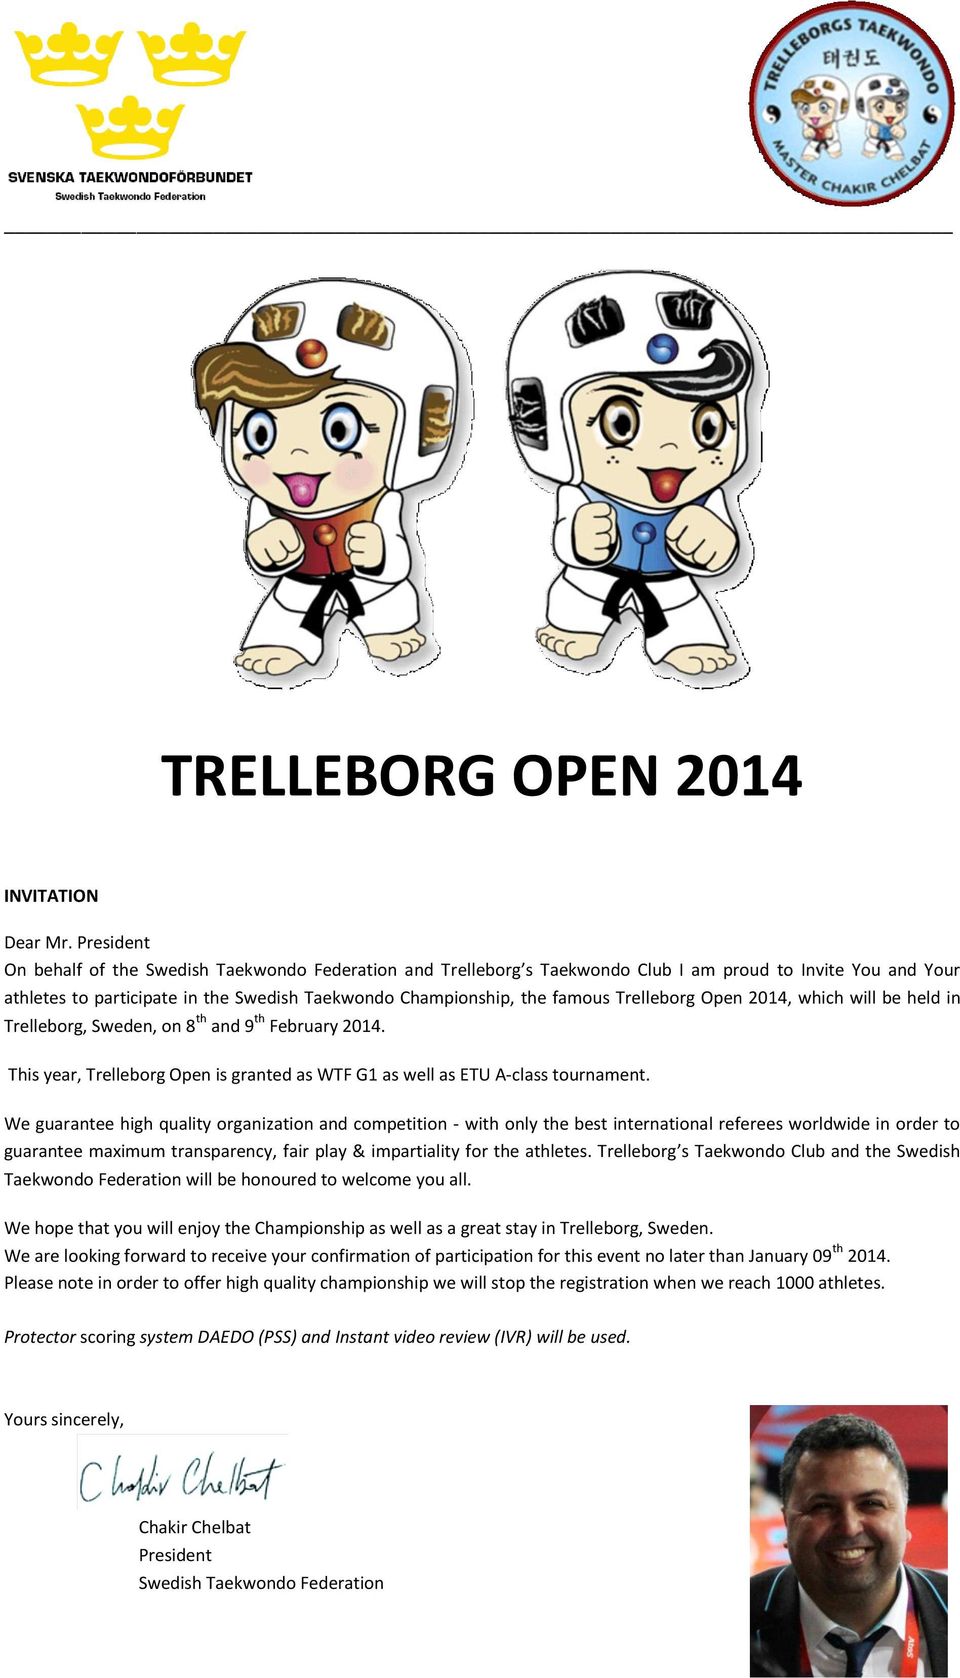 Trelleborg Open 2014, which will be held in Trelleborg, Sweden, on 8 th and 9 th February 2014. This year, Trelleborg Open is granted as WTF G1 as well as ETU A-class tournament.